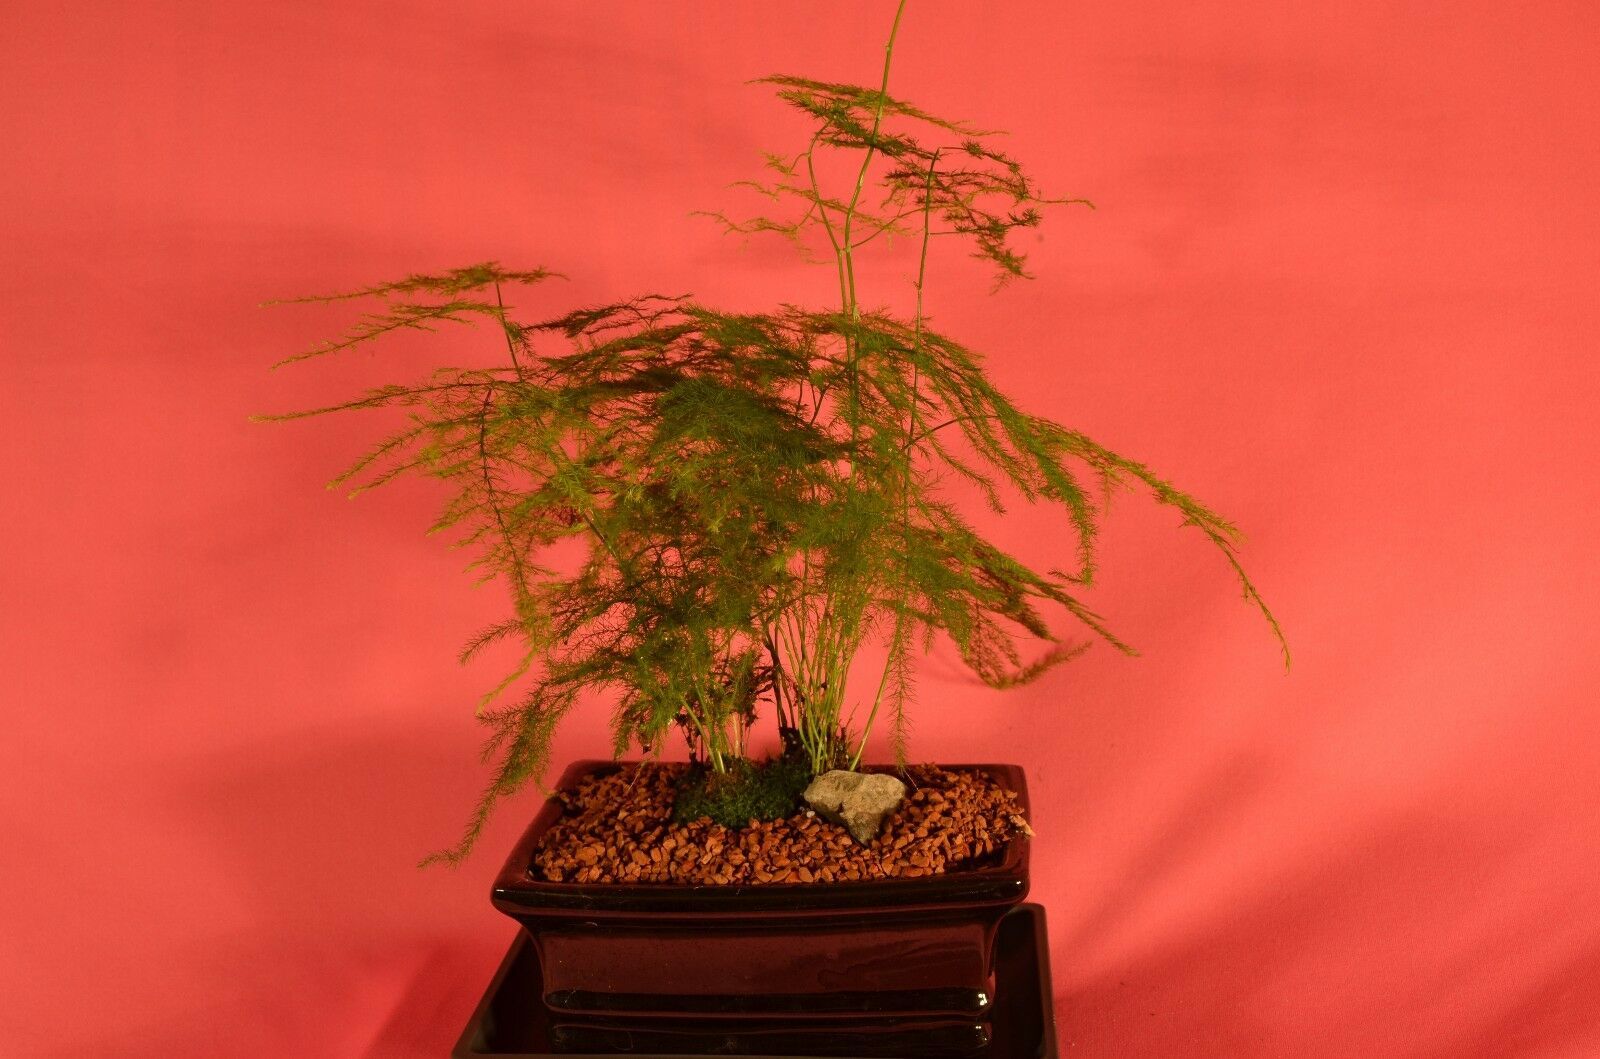 INDOOR BONSAI,ASPARAGUS FERN,6 YEARS OLD,LOW LIGHT,PERFECT INDOOR OFFICE BONSAI. - $49.99